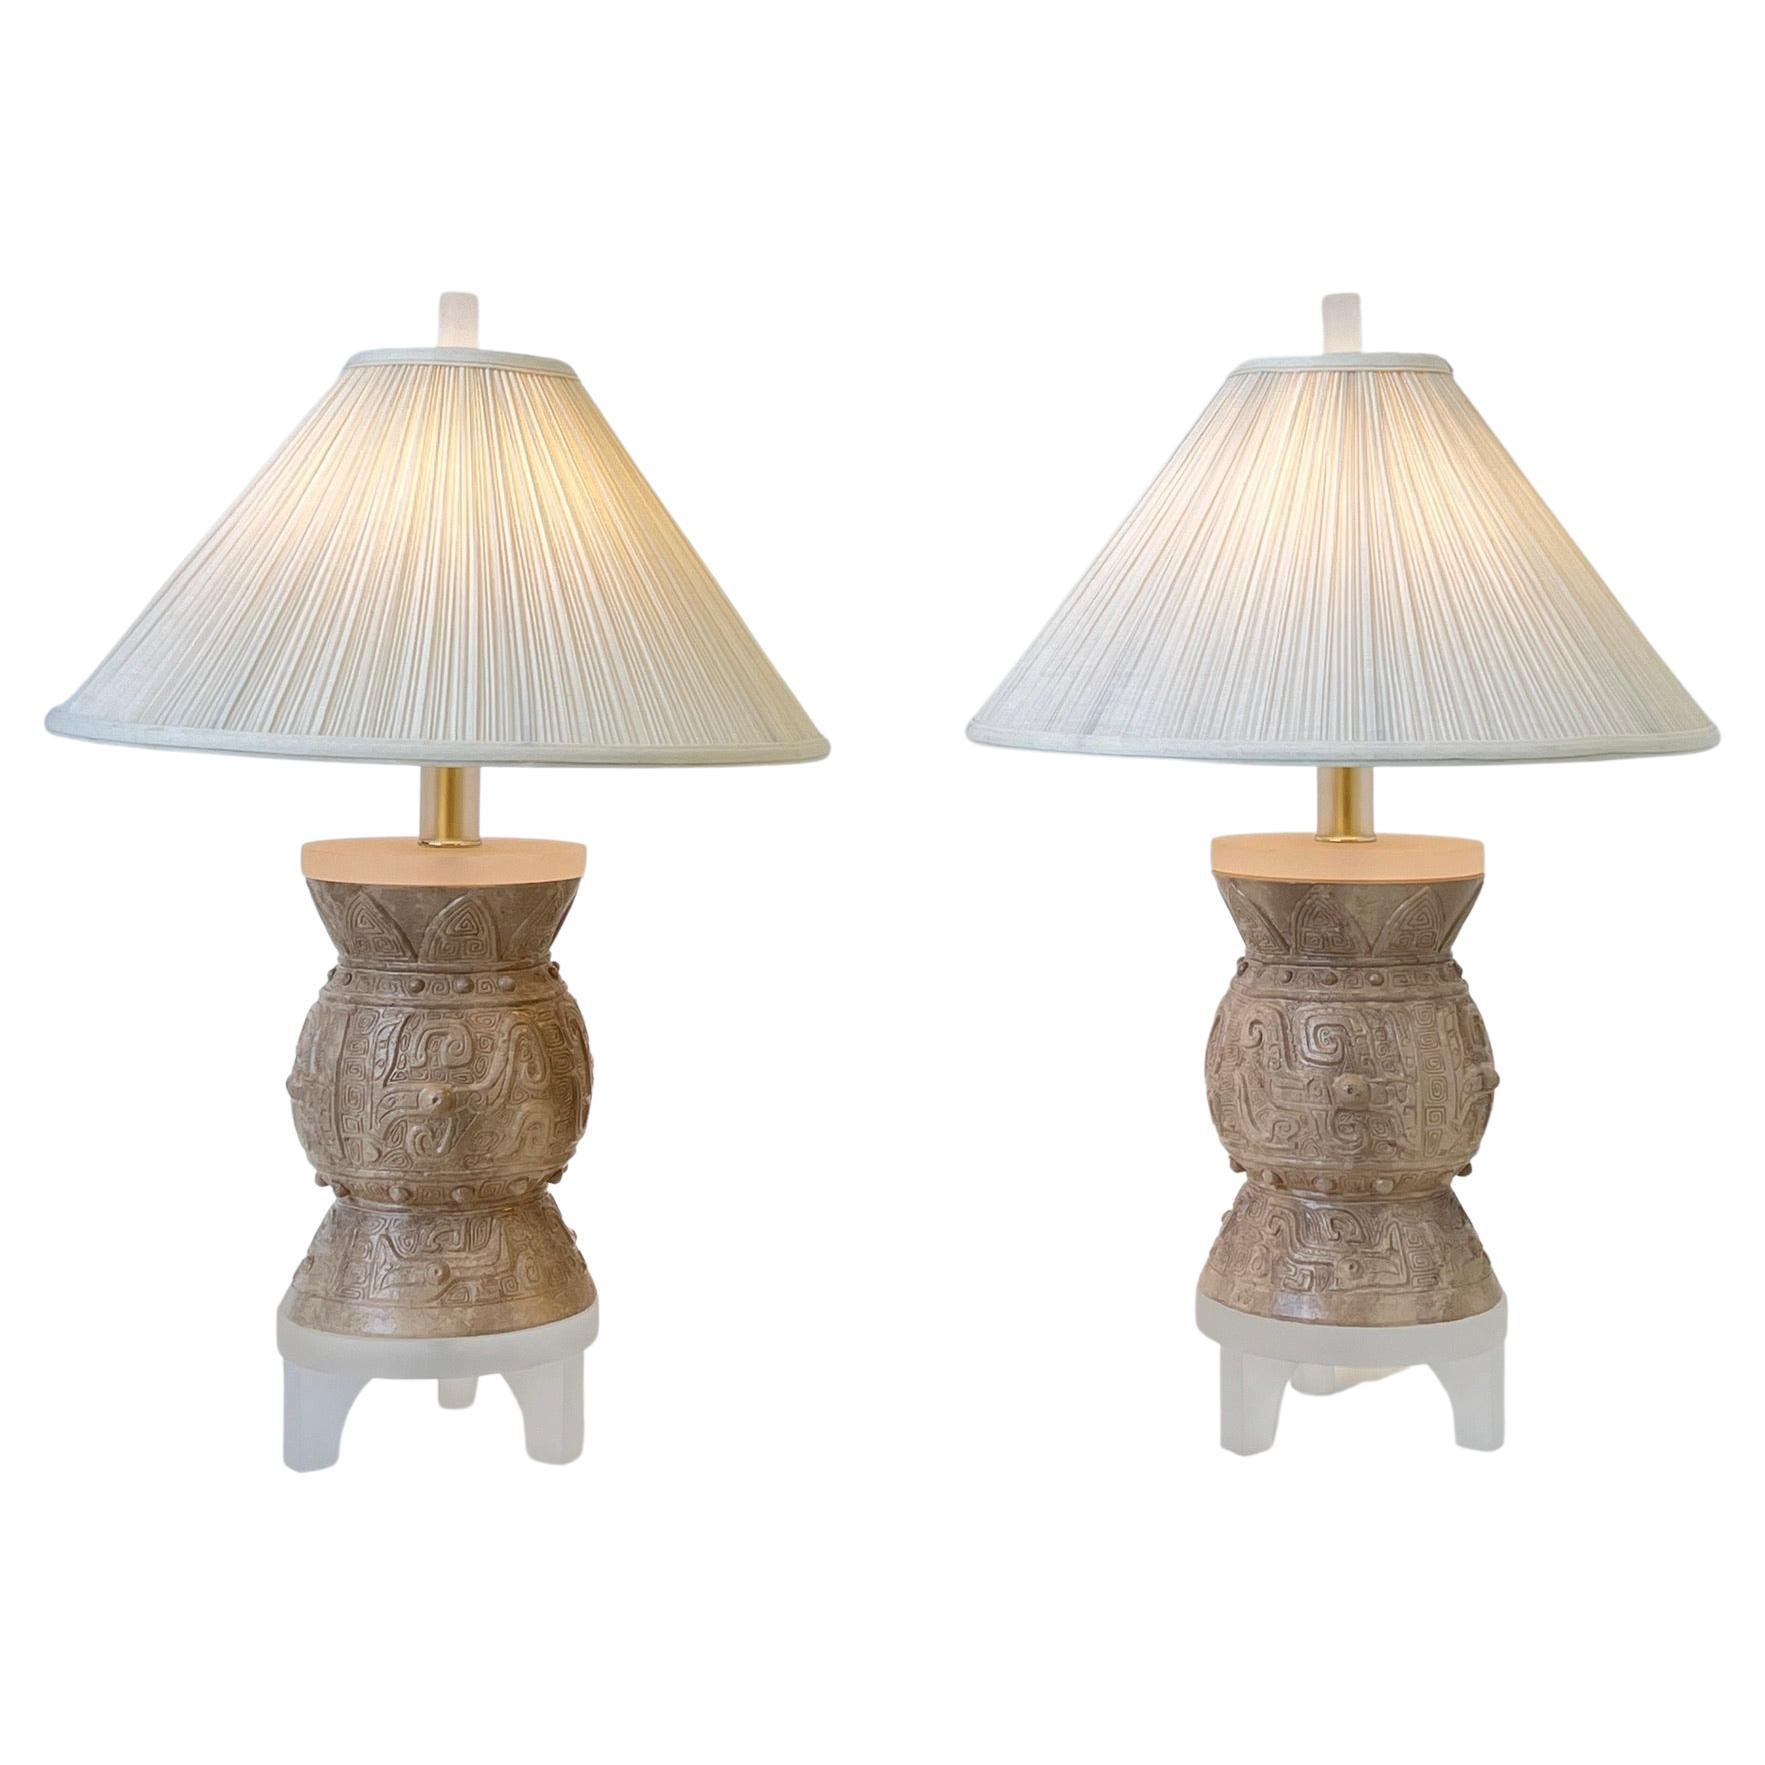 Pair of Plaster and Lucite Table Lamps by Bauer Lamp Co.